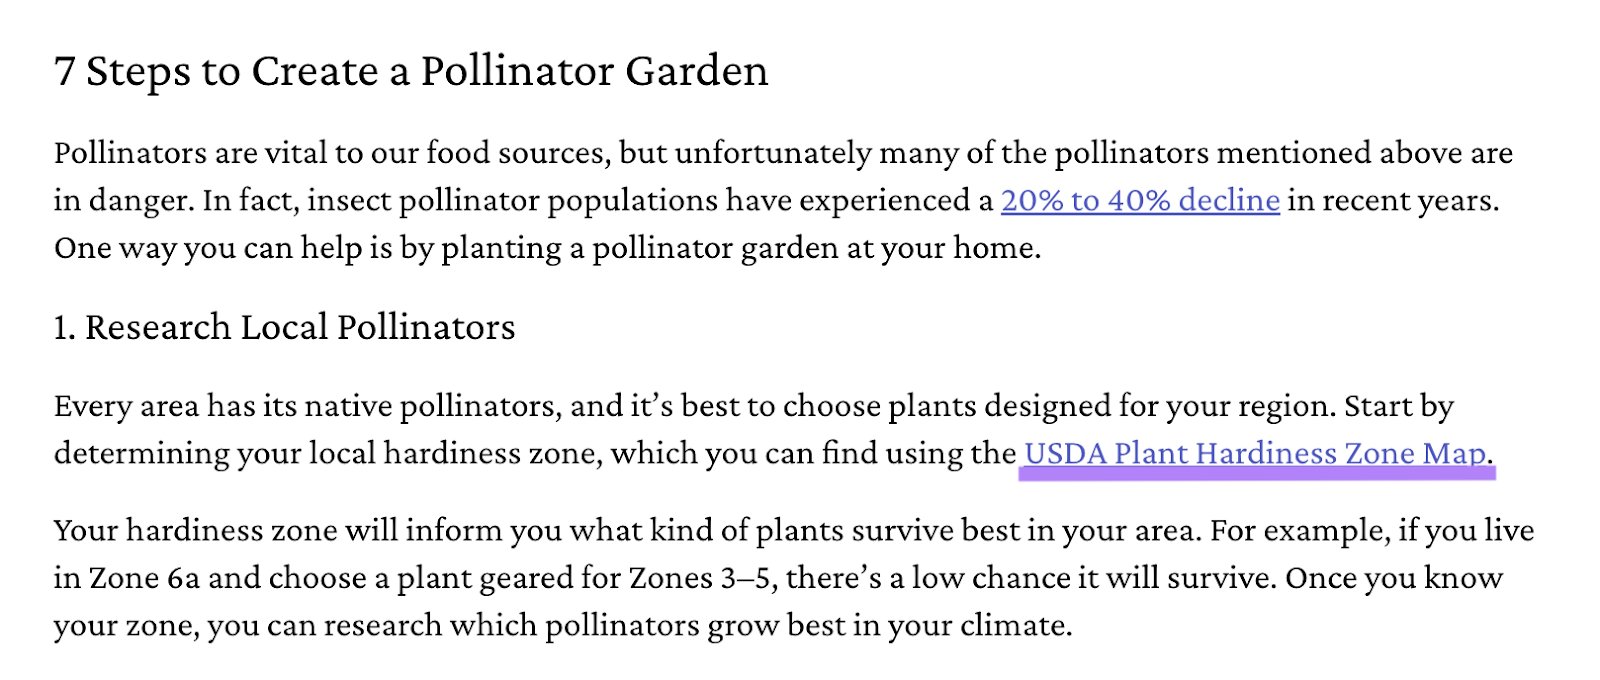 in a blog about pollinator gardens, the page links out to the USDA's plant hardiness zone map